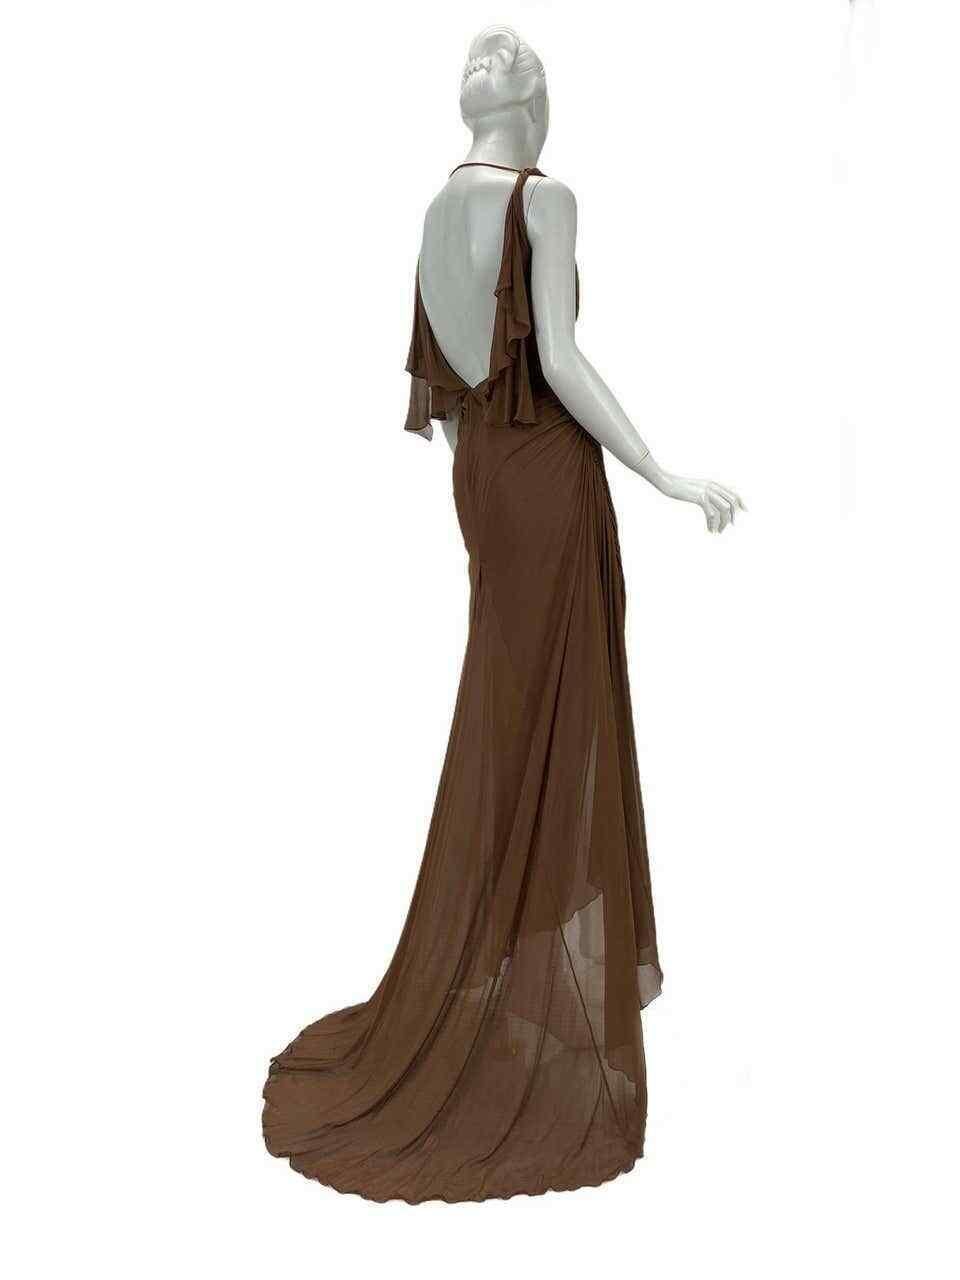 Women's S/S 2003 Vintage Tom Ford For Gucci Greek Goddess Silk Gown as seen in Museum For Sale